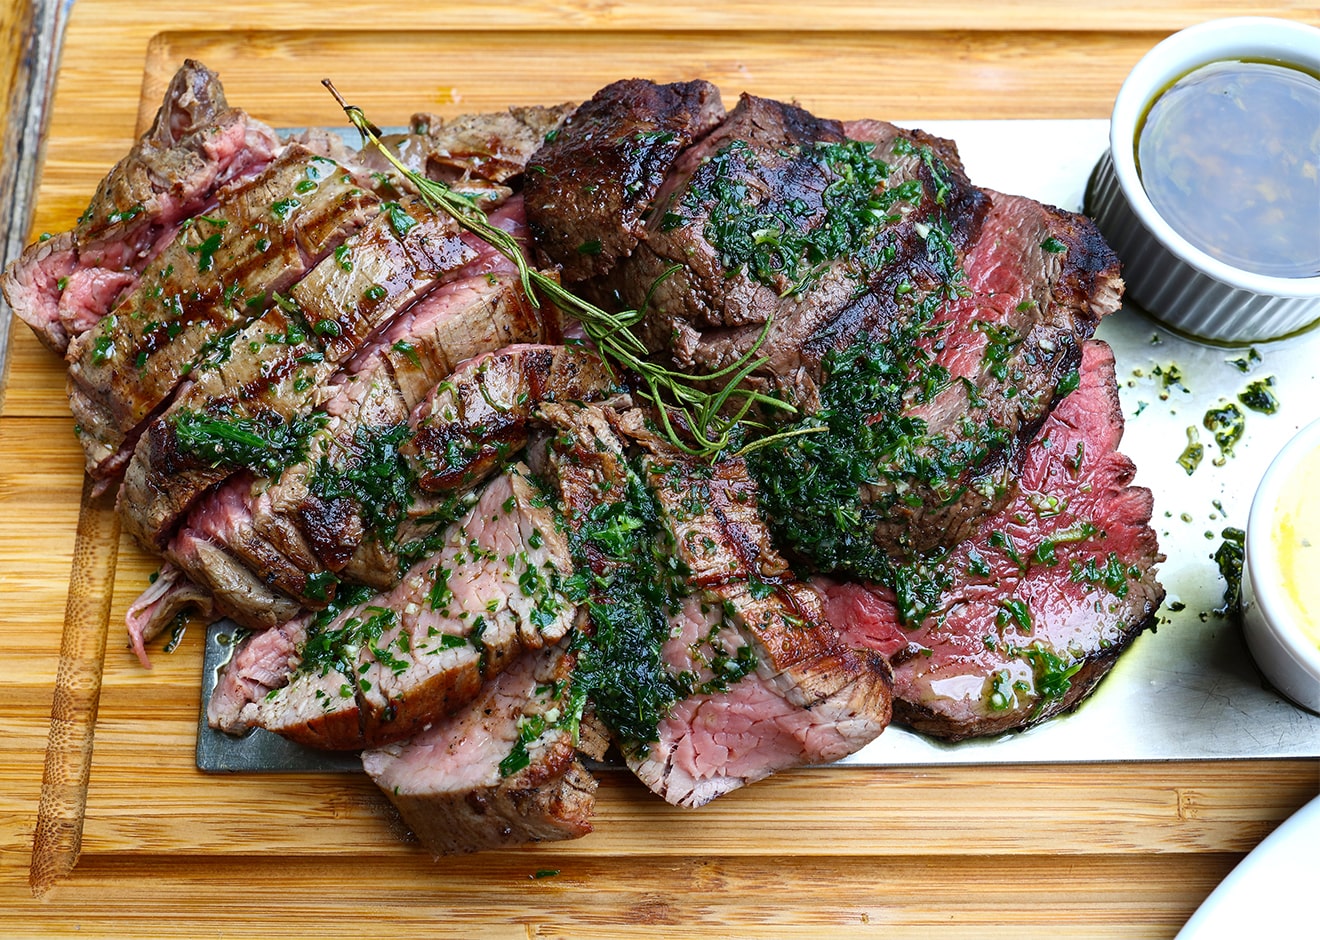 Chateaubriand garnished with parsley on a wooden tray